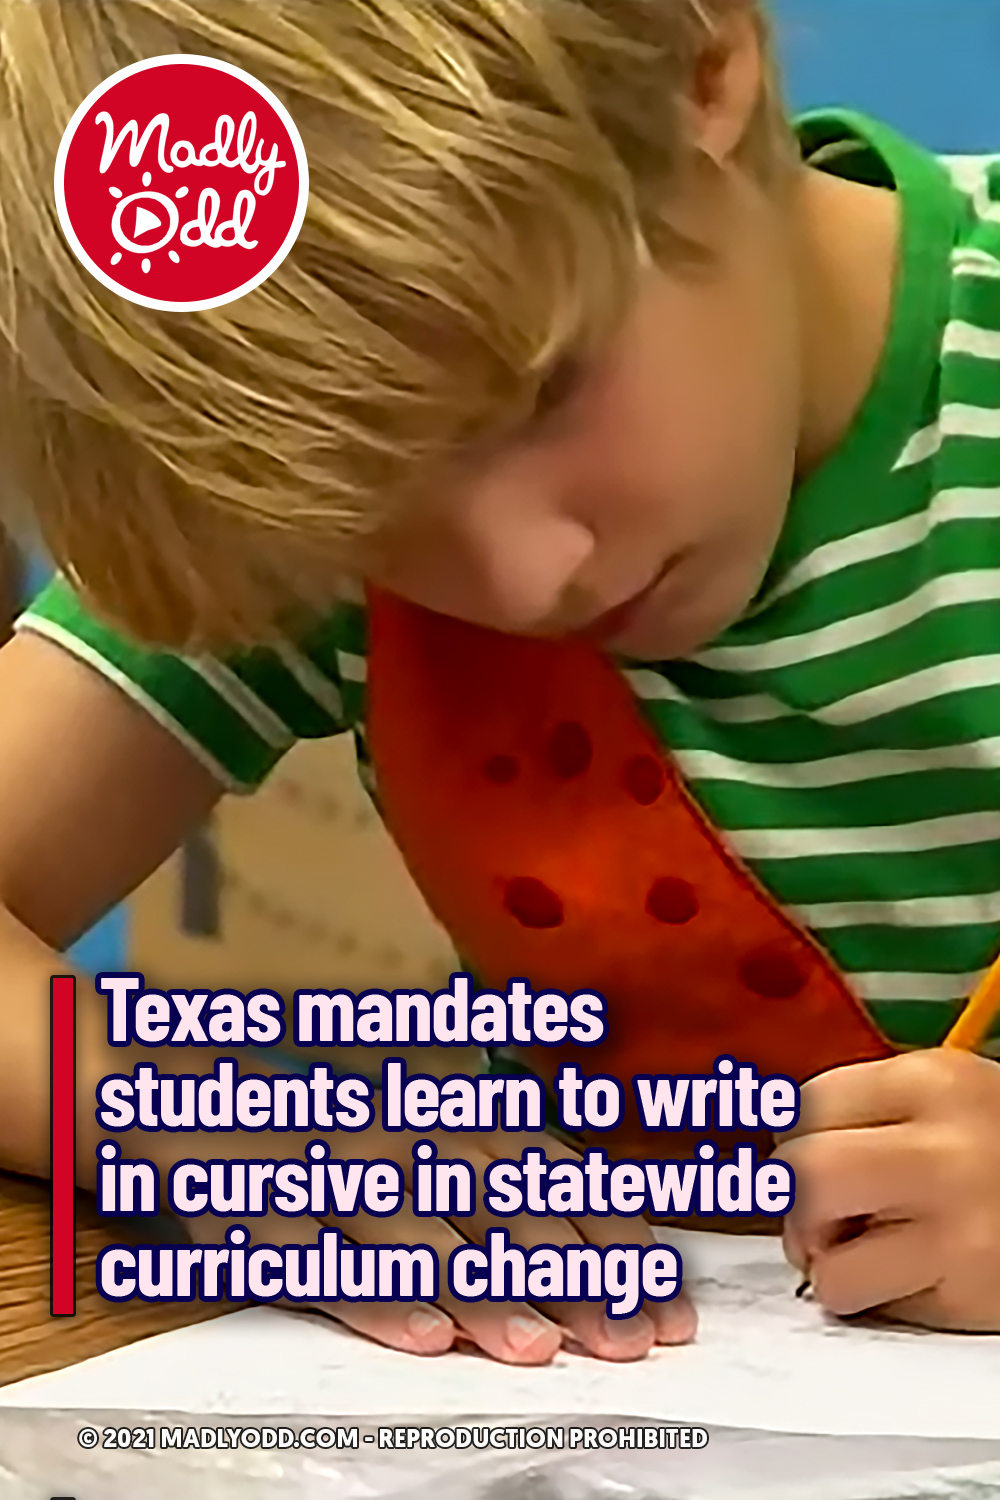 Texas mandates students learn to write in cursive in statewide curriculum change